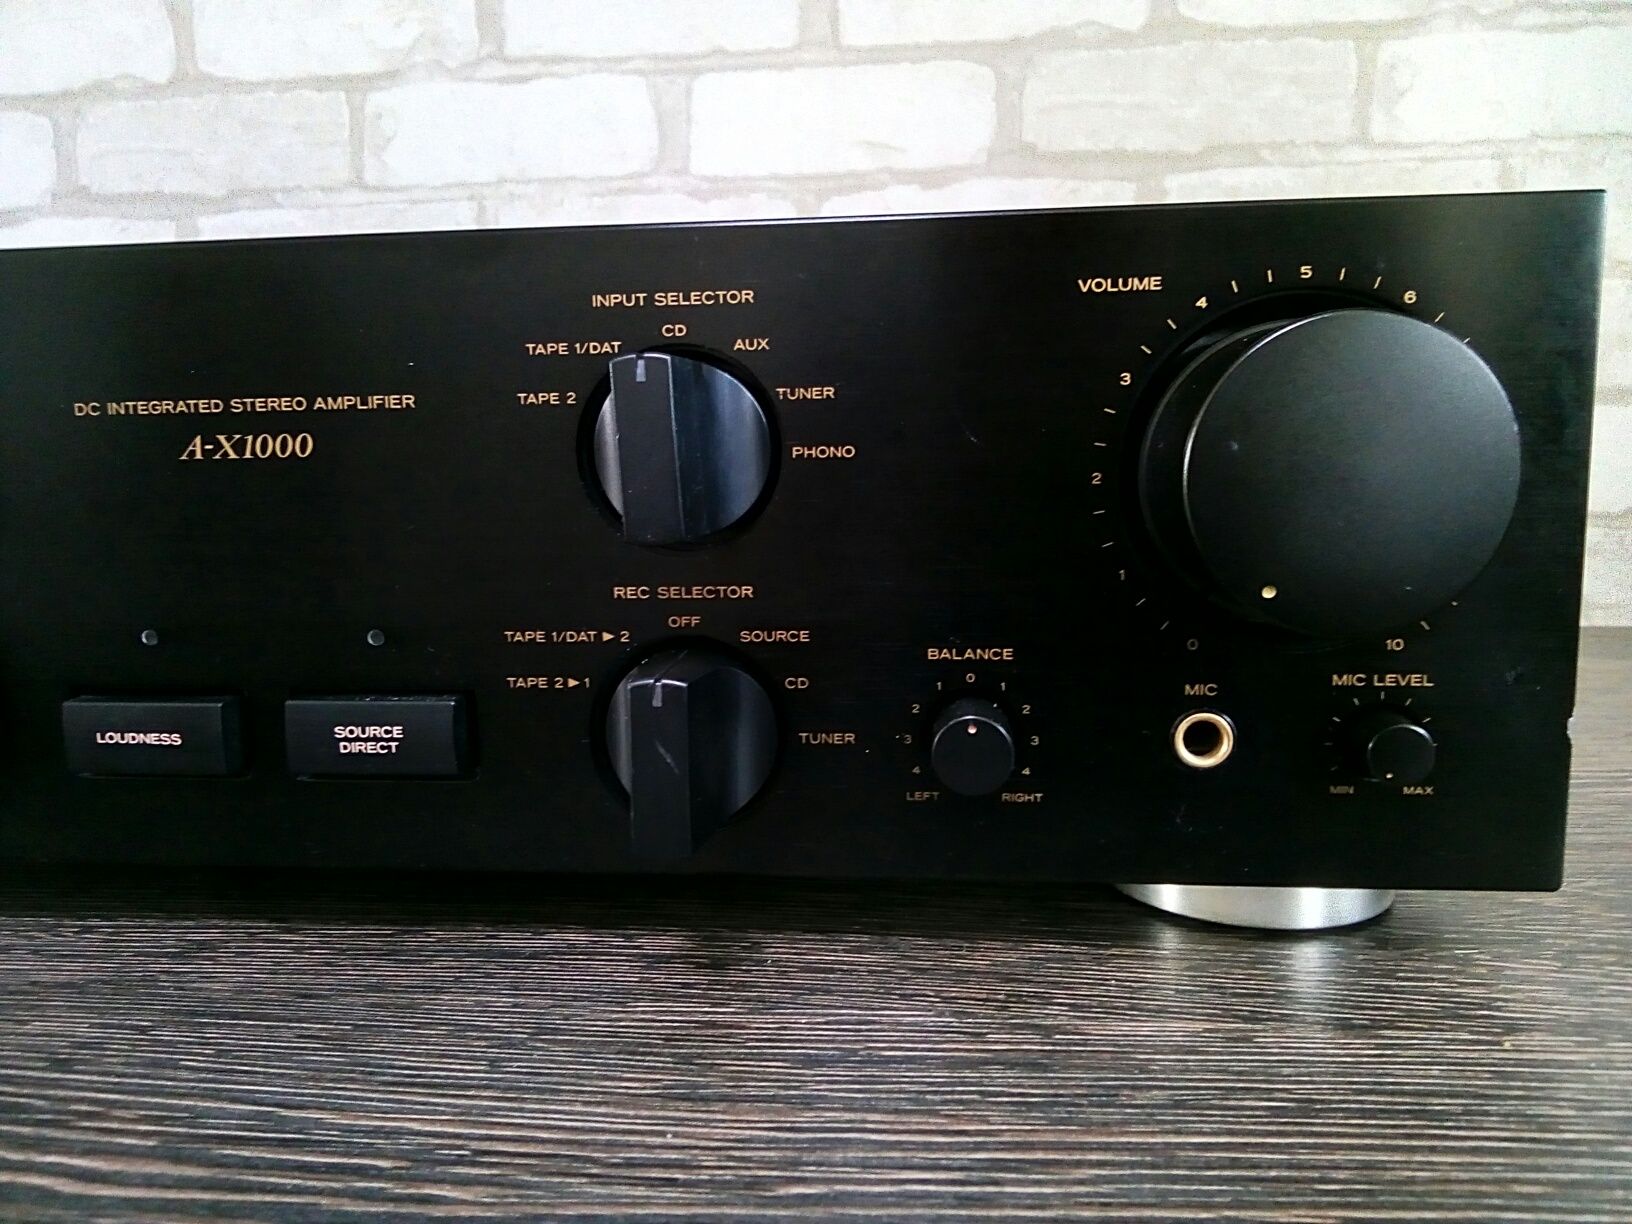 Teac A-X1000 integrated stereo amplifier